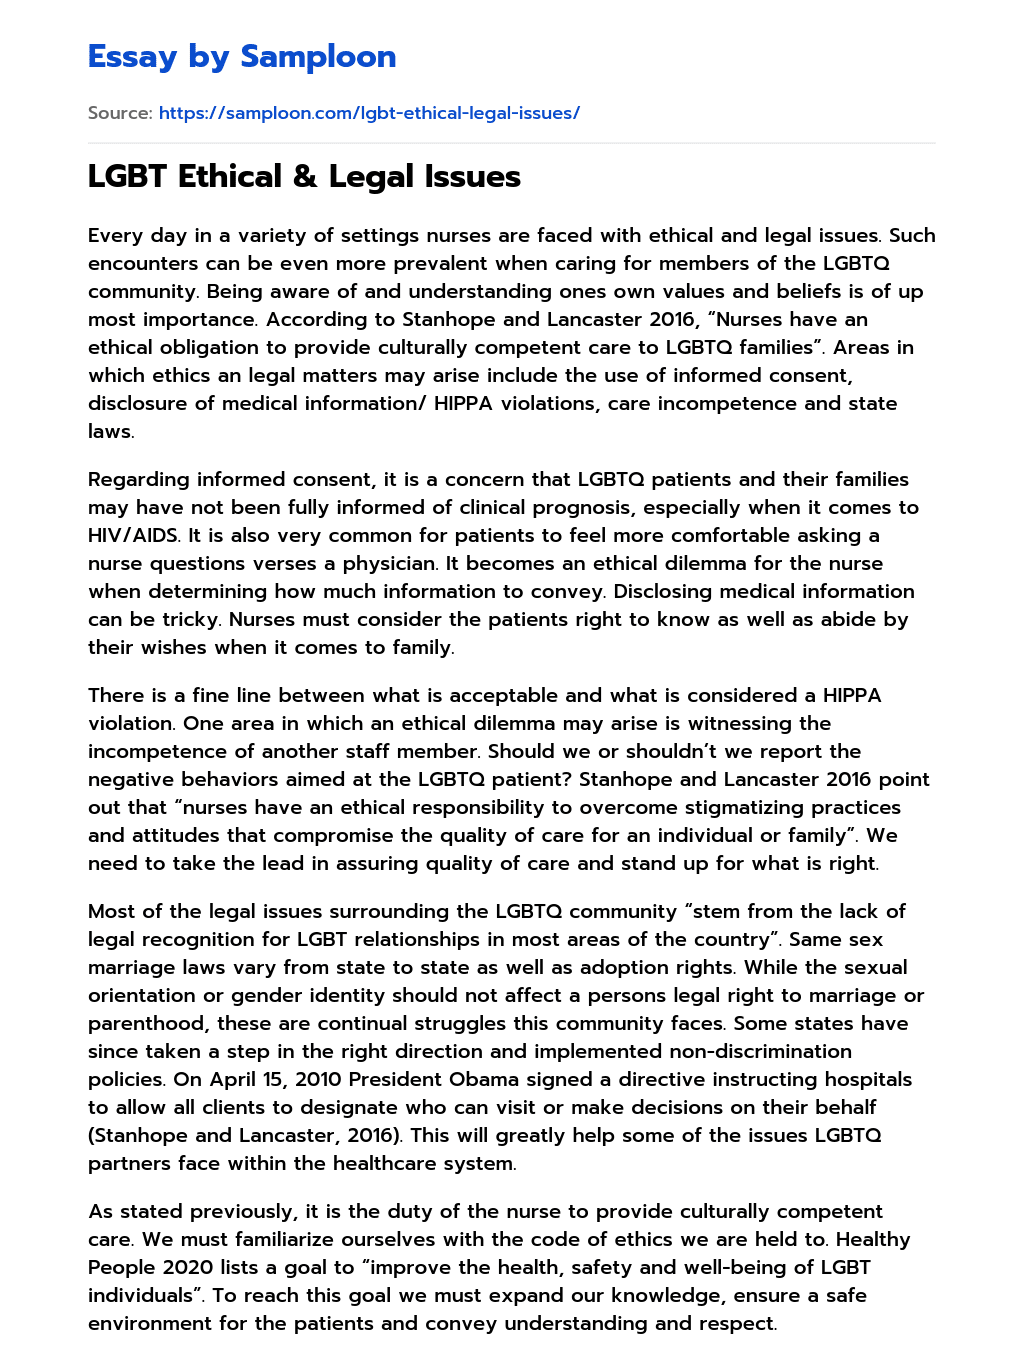 LGBT Ethical & Legal Issues  essay